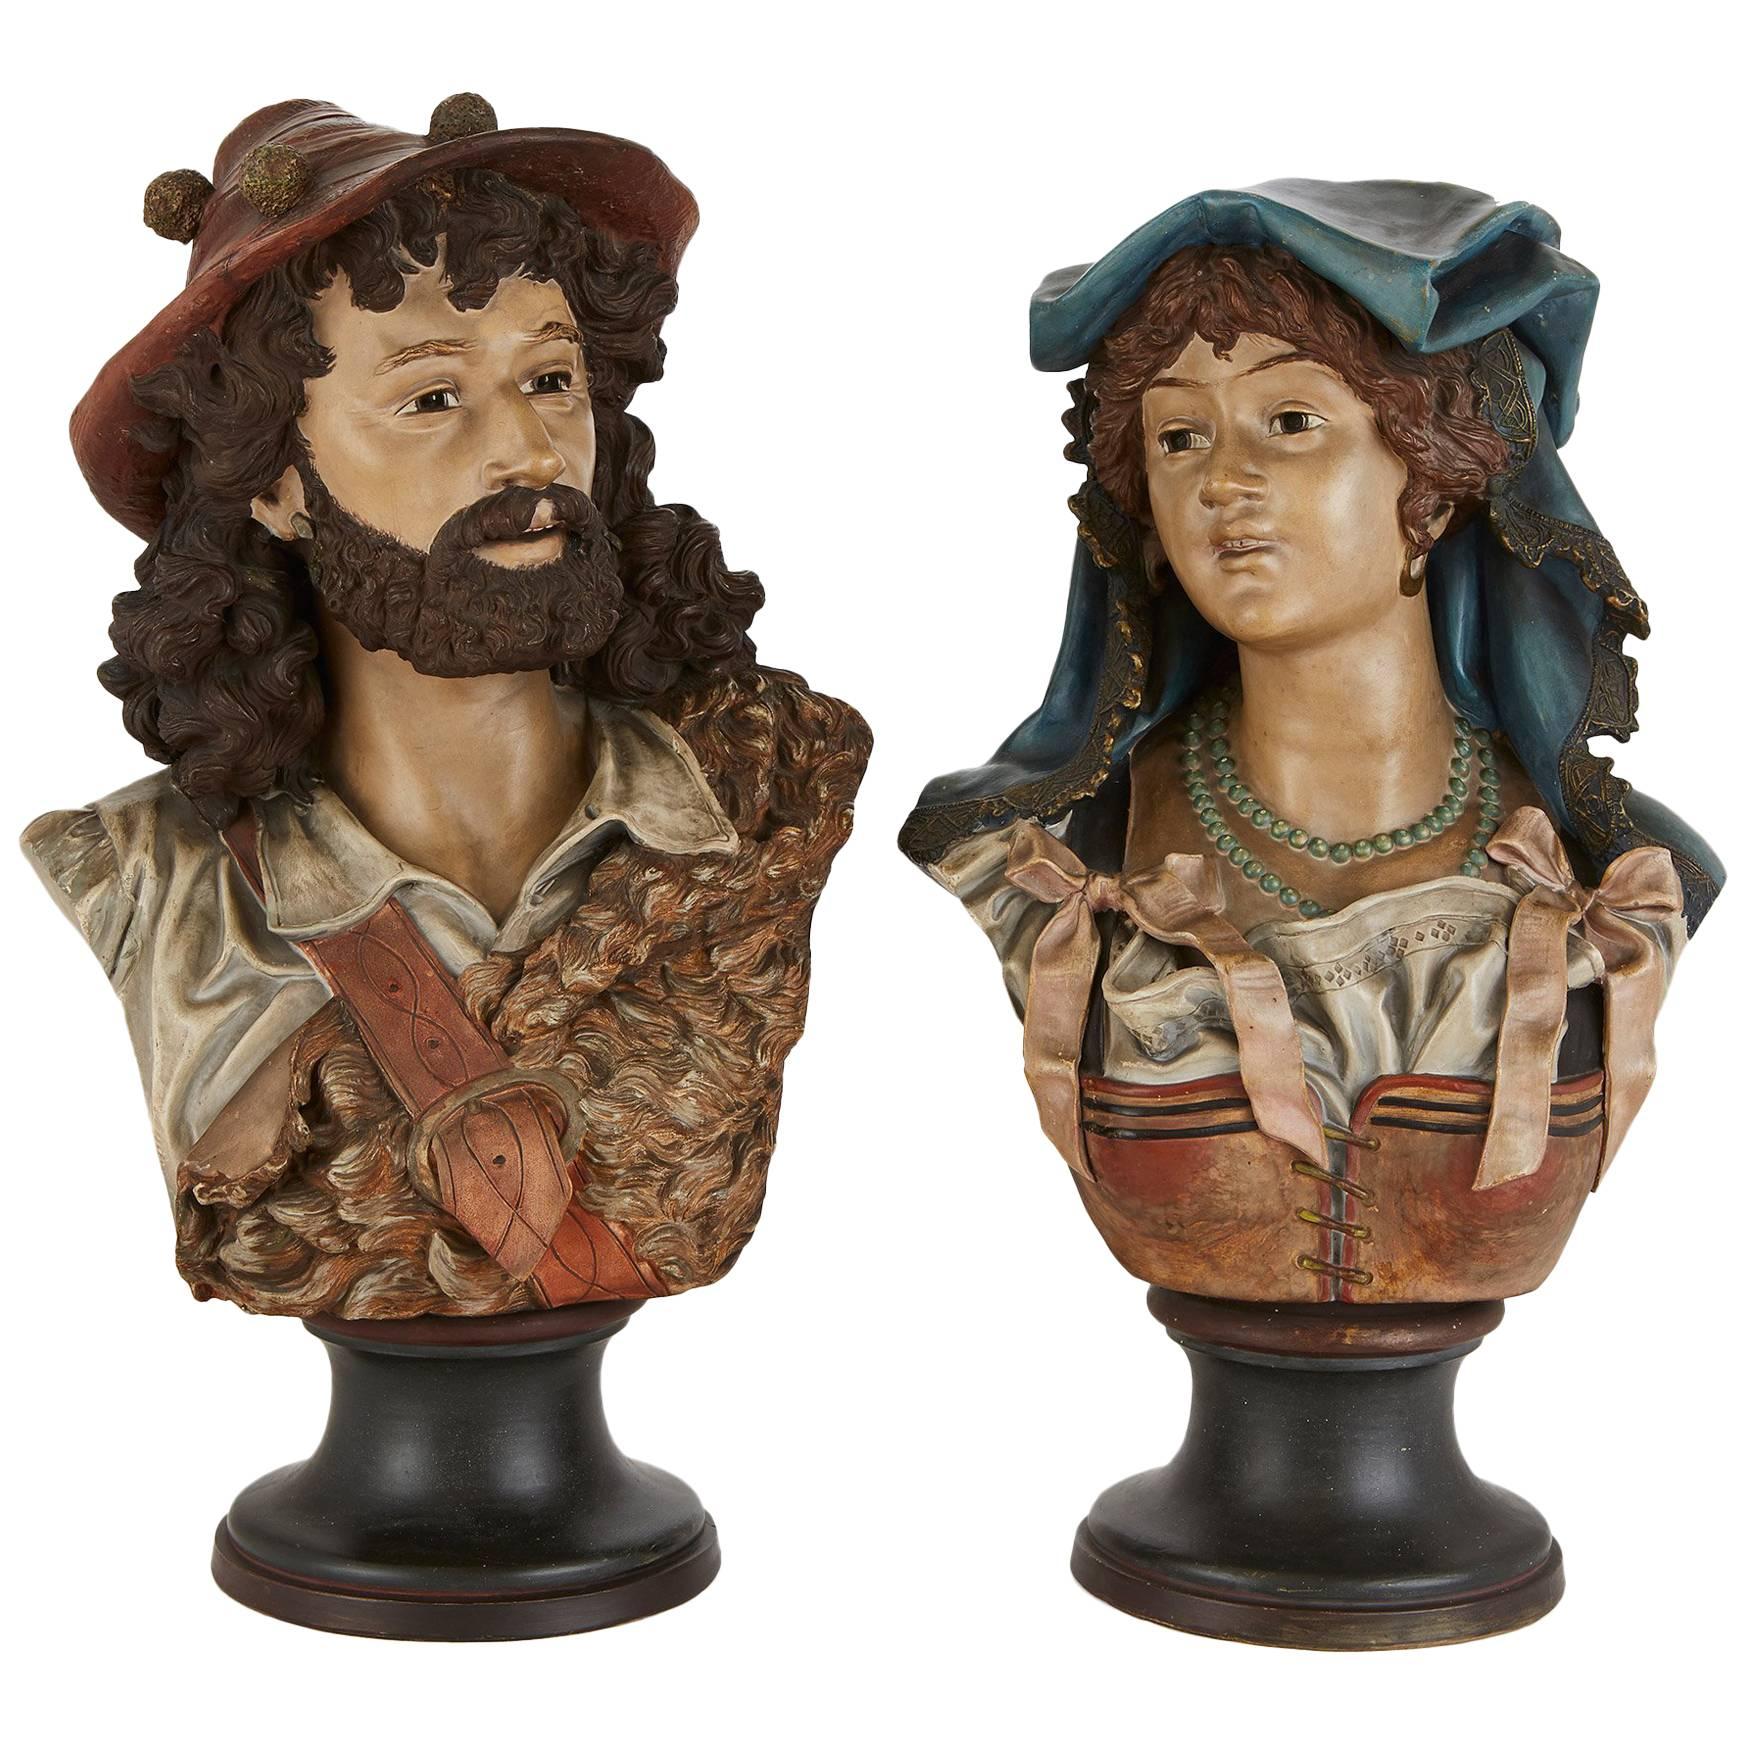 Pair of Antique Tyrolean Terracotta Busts of a Bavarian Man and Woman